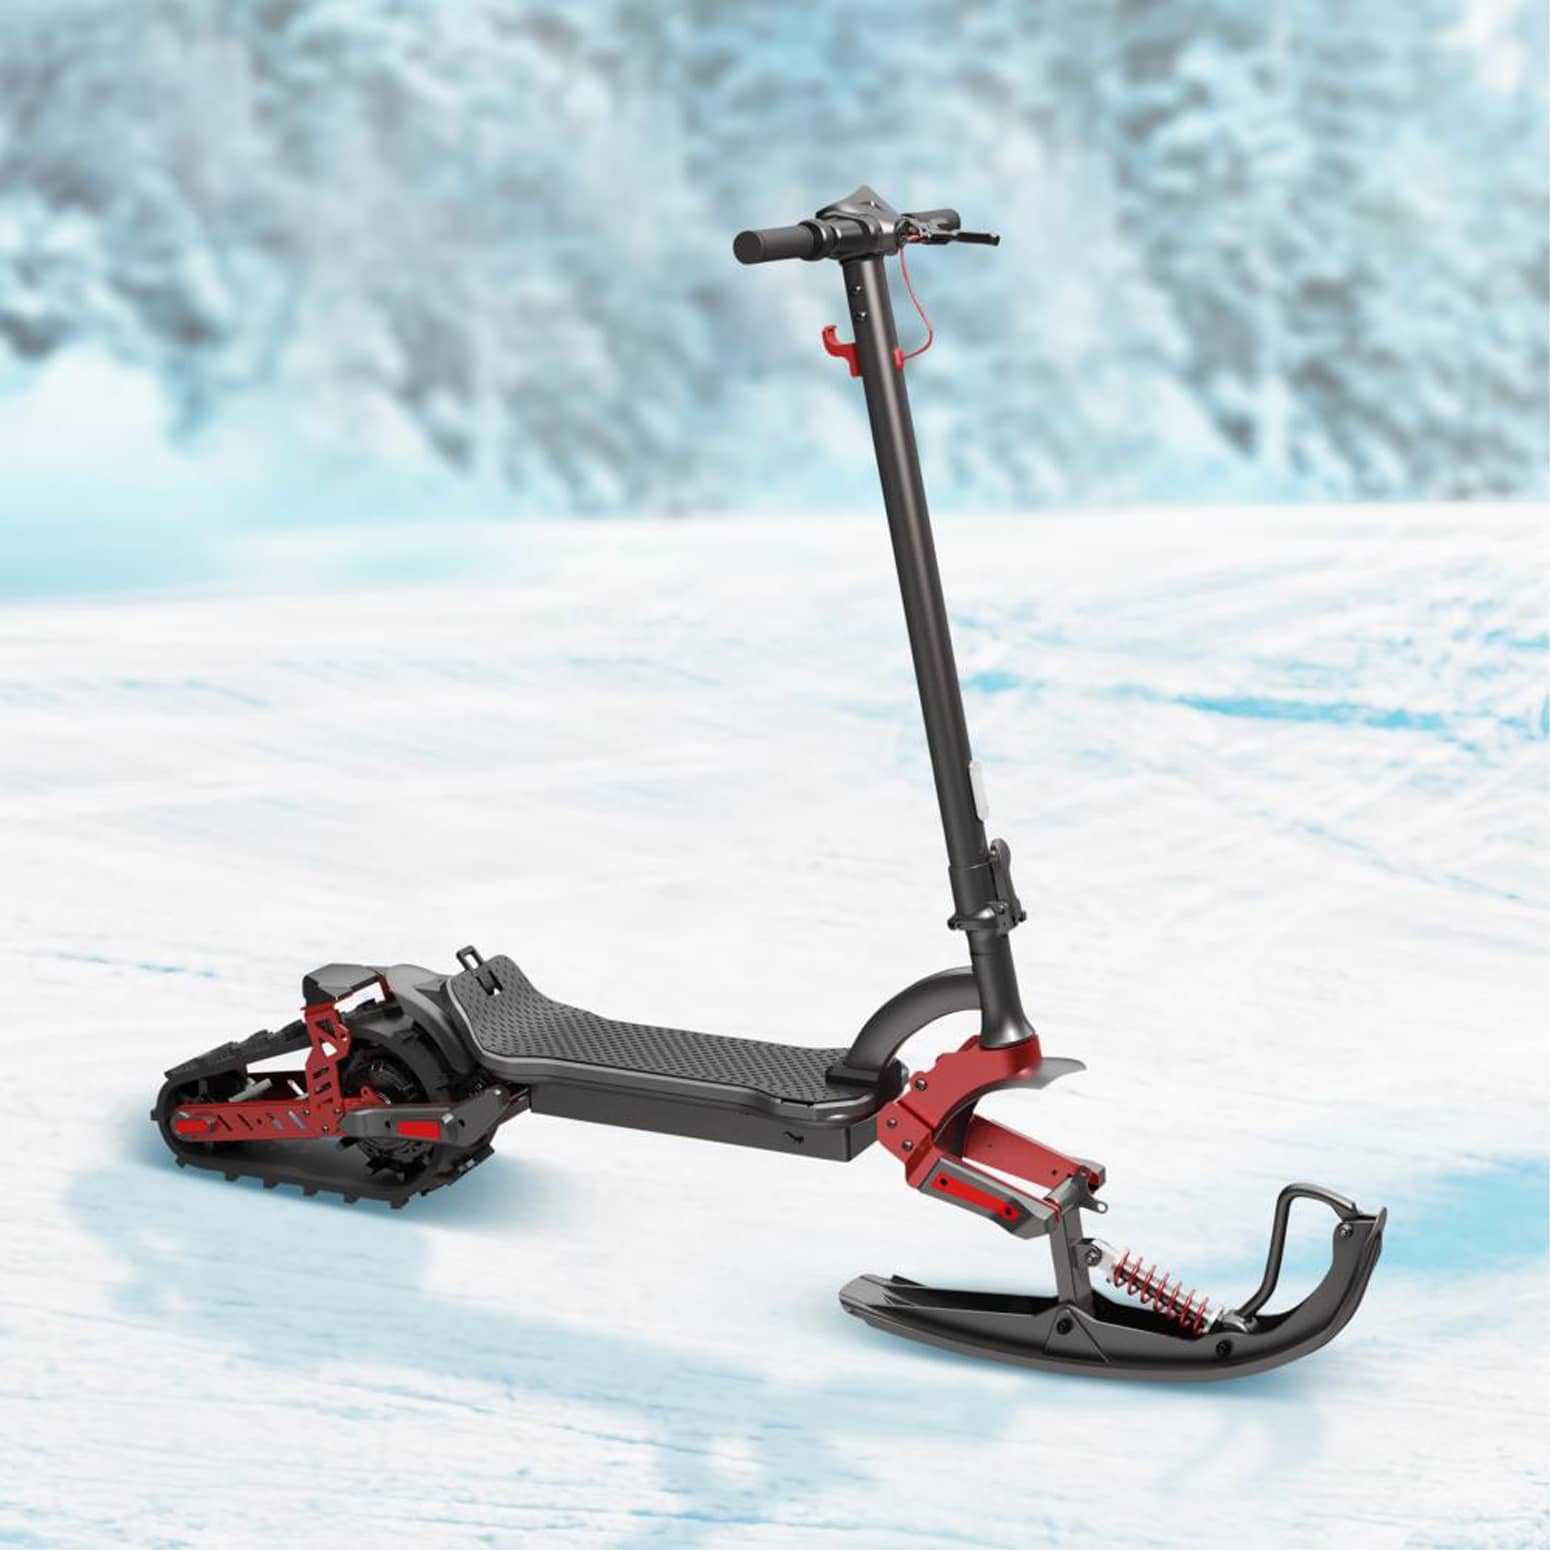 3-in-1 All-Terrain Electric Scooter - Ski / Road / Off-Road